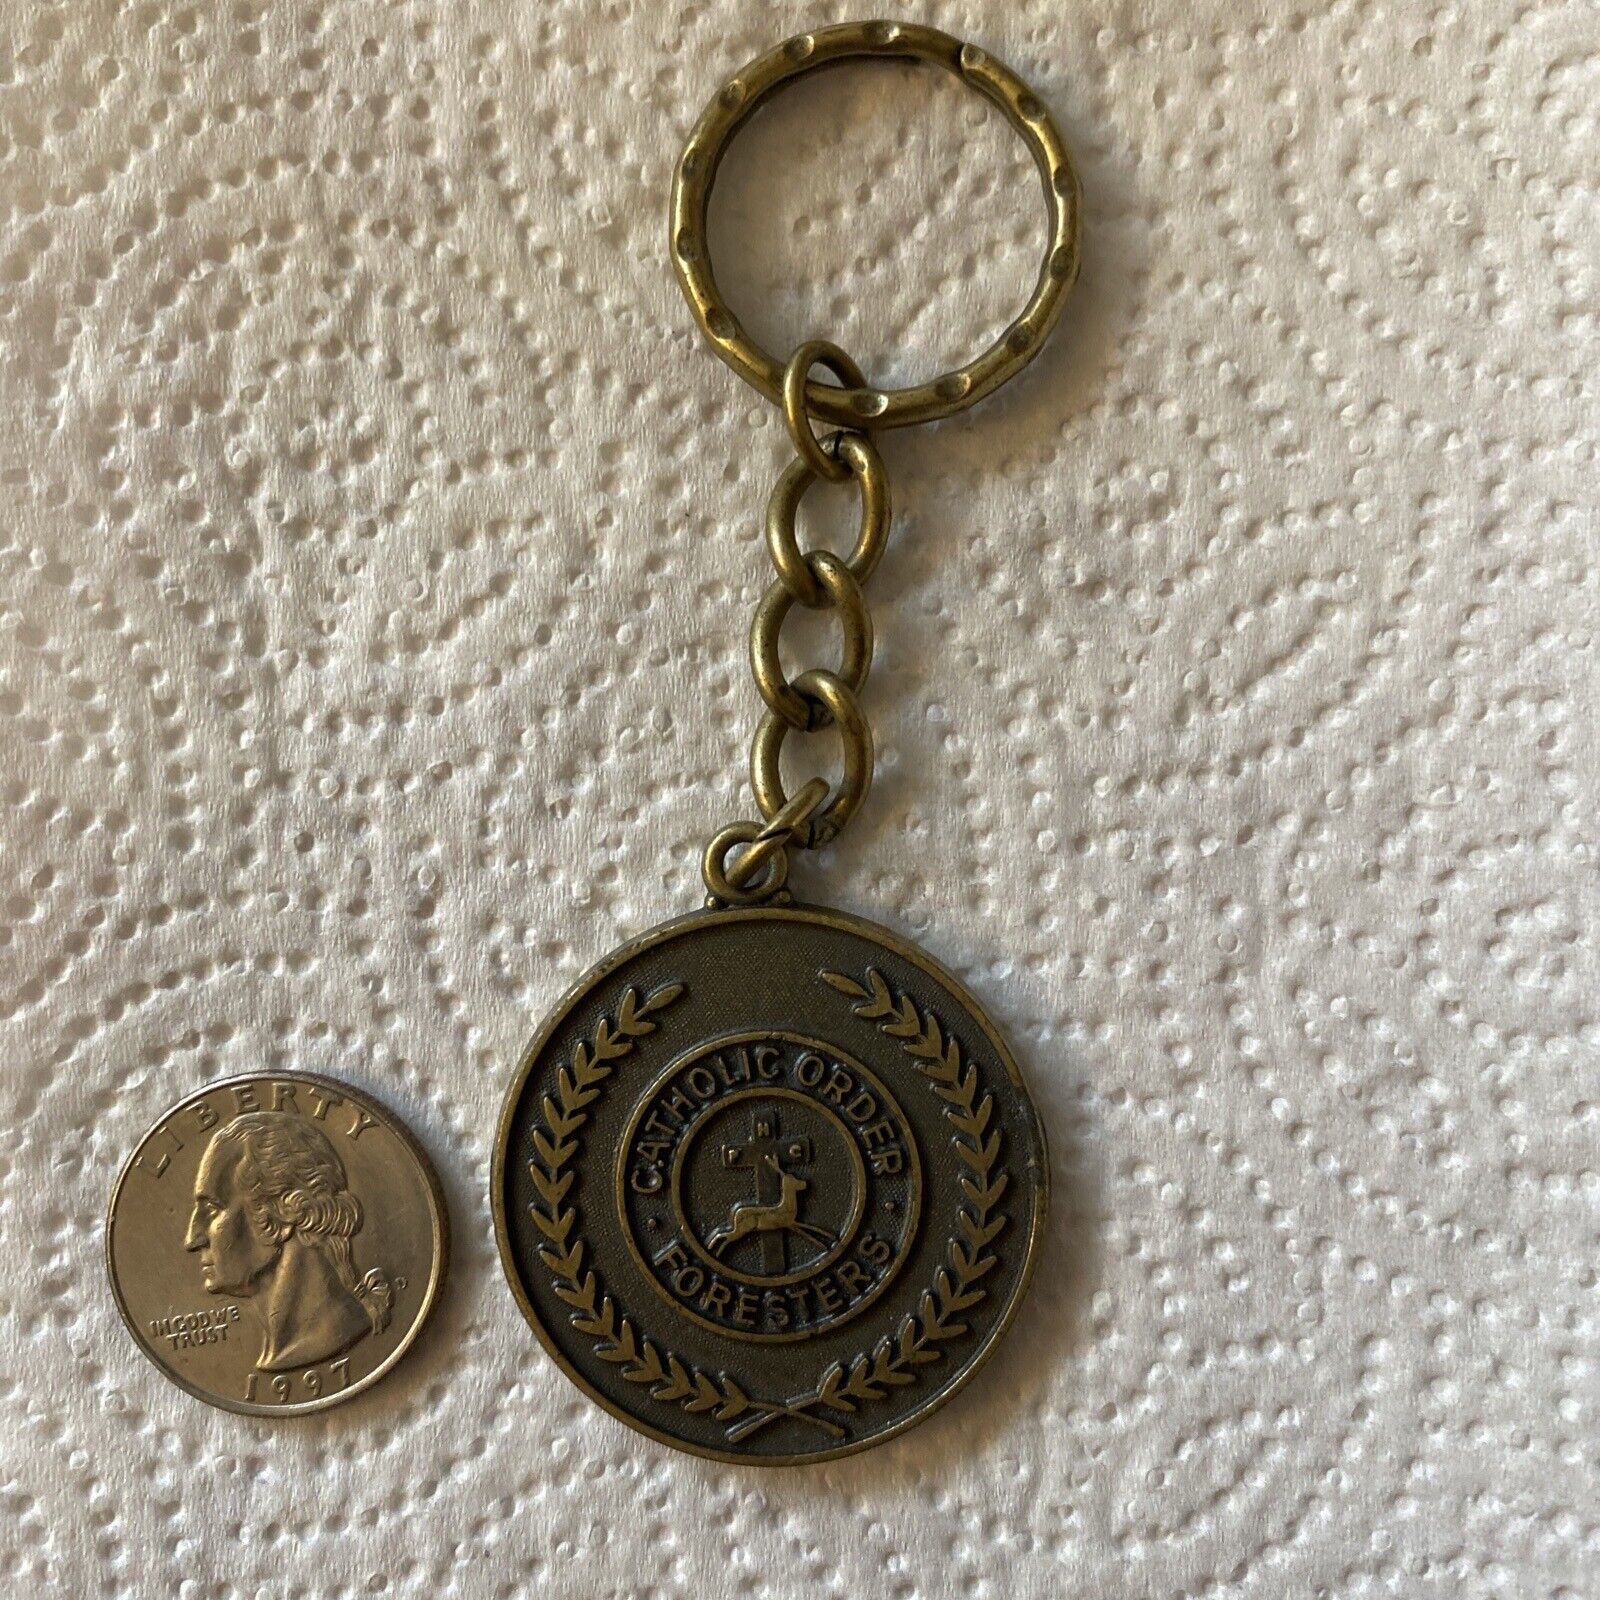 Catholic Order of Foresters Metal Key Chain 100th Year Anniversary 1883-1983